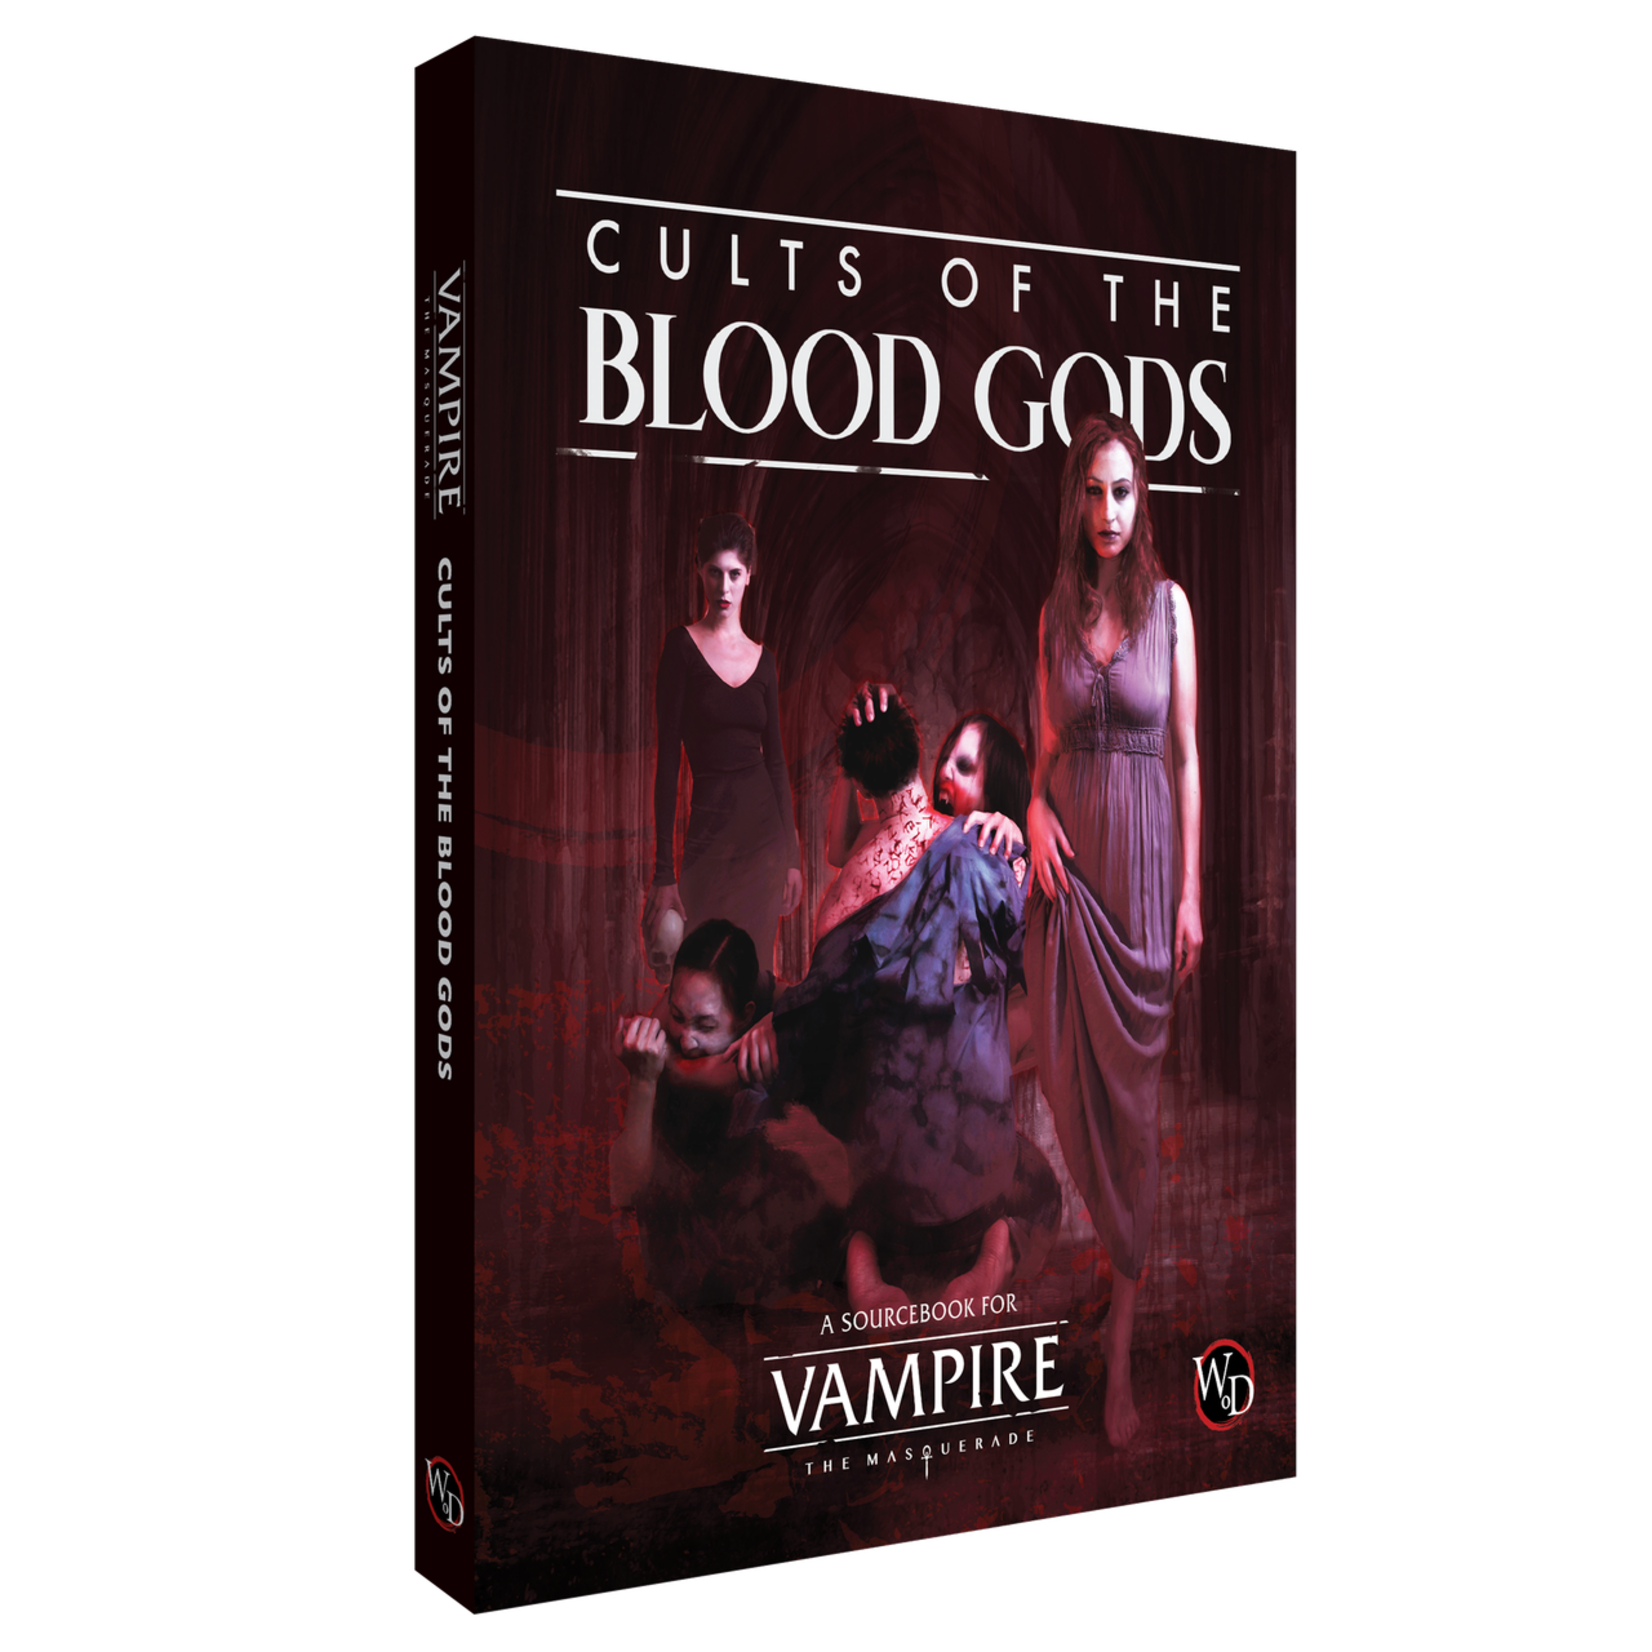 Vampire the Masquerade 5e Cults of the Blood Gods Sourcebook